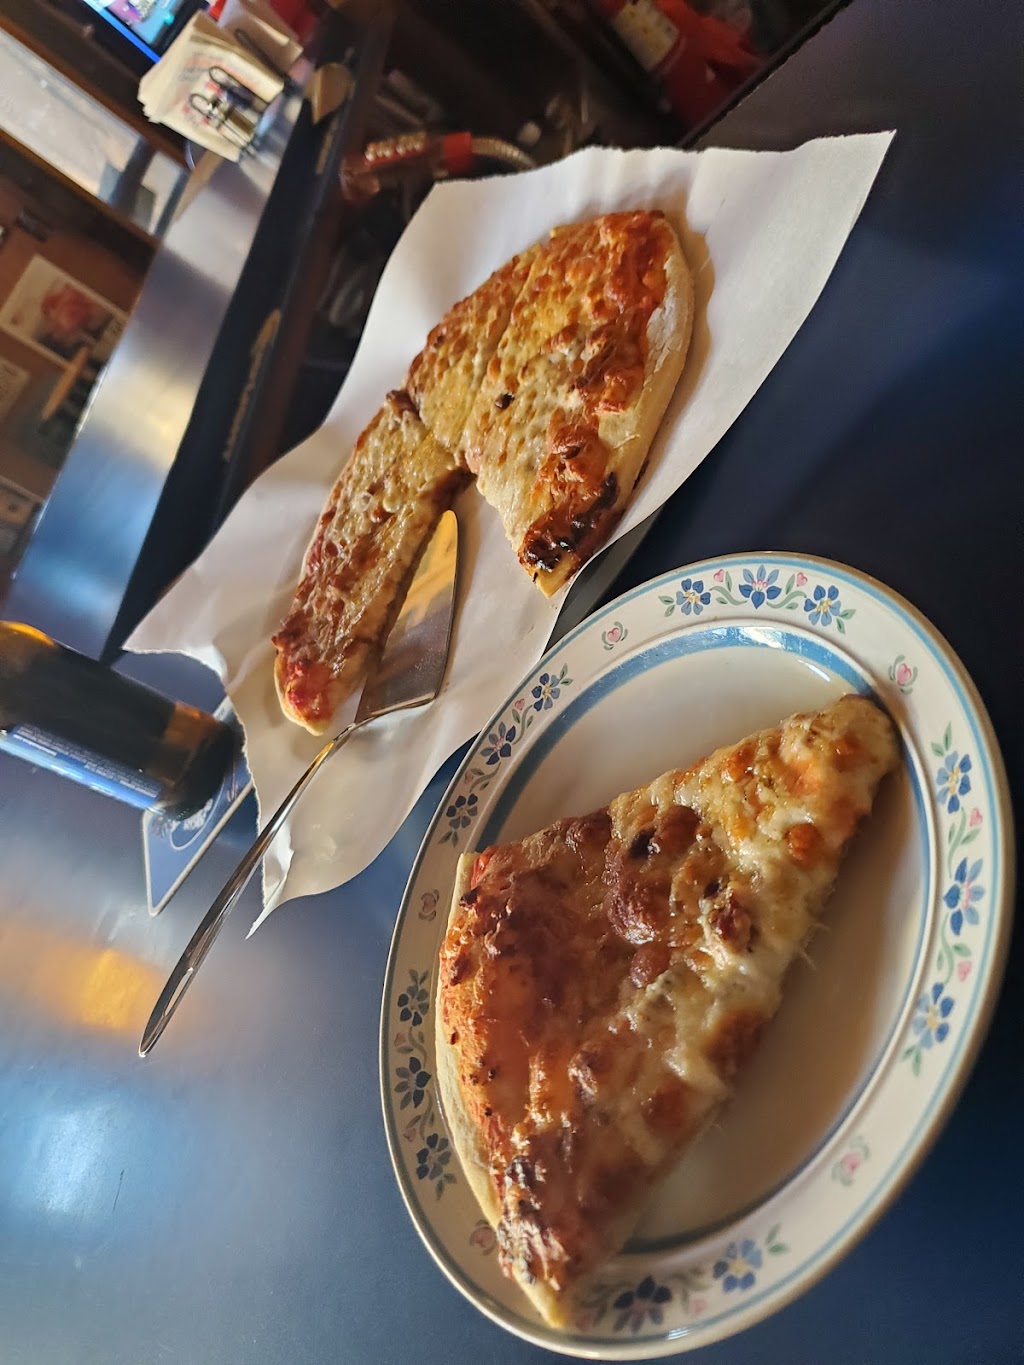 Classic Pizza | 29 Main St, Chester, MA 01011 | Phone: (413) 354-6554